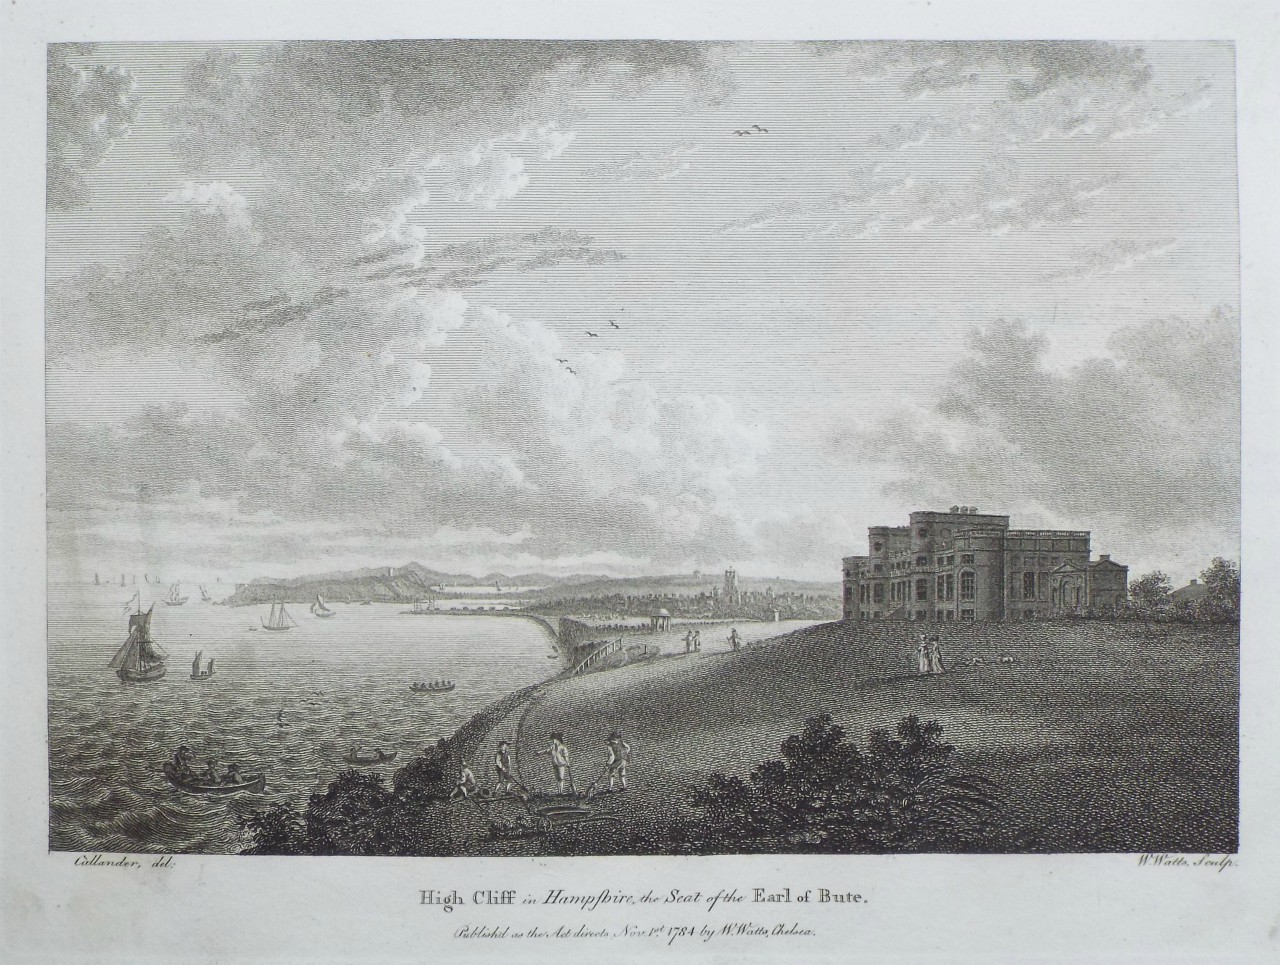 Print - High Cliff in Hampshire, the Seat of the Earl of Bute. - Watts